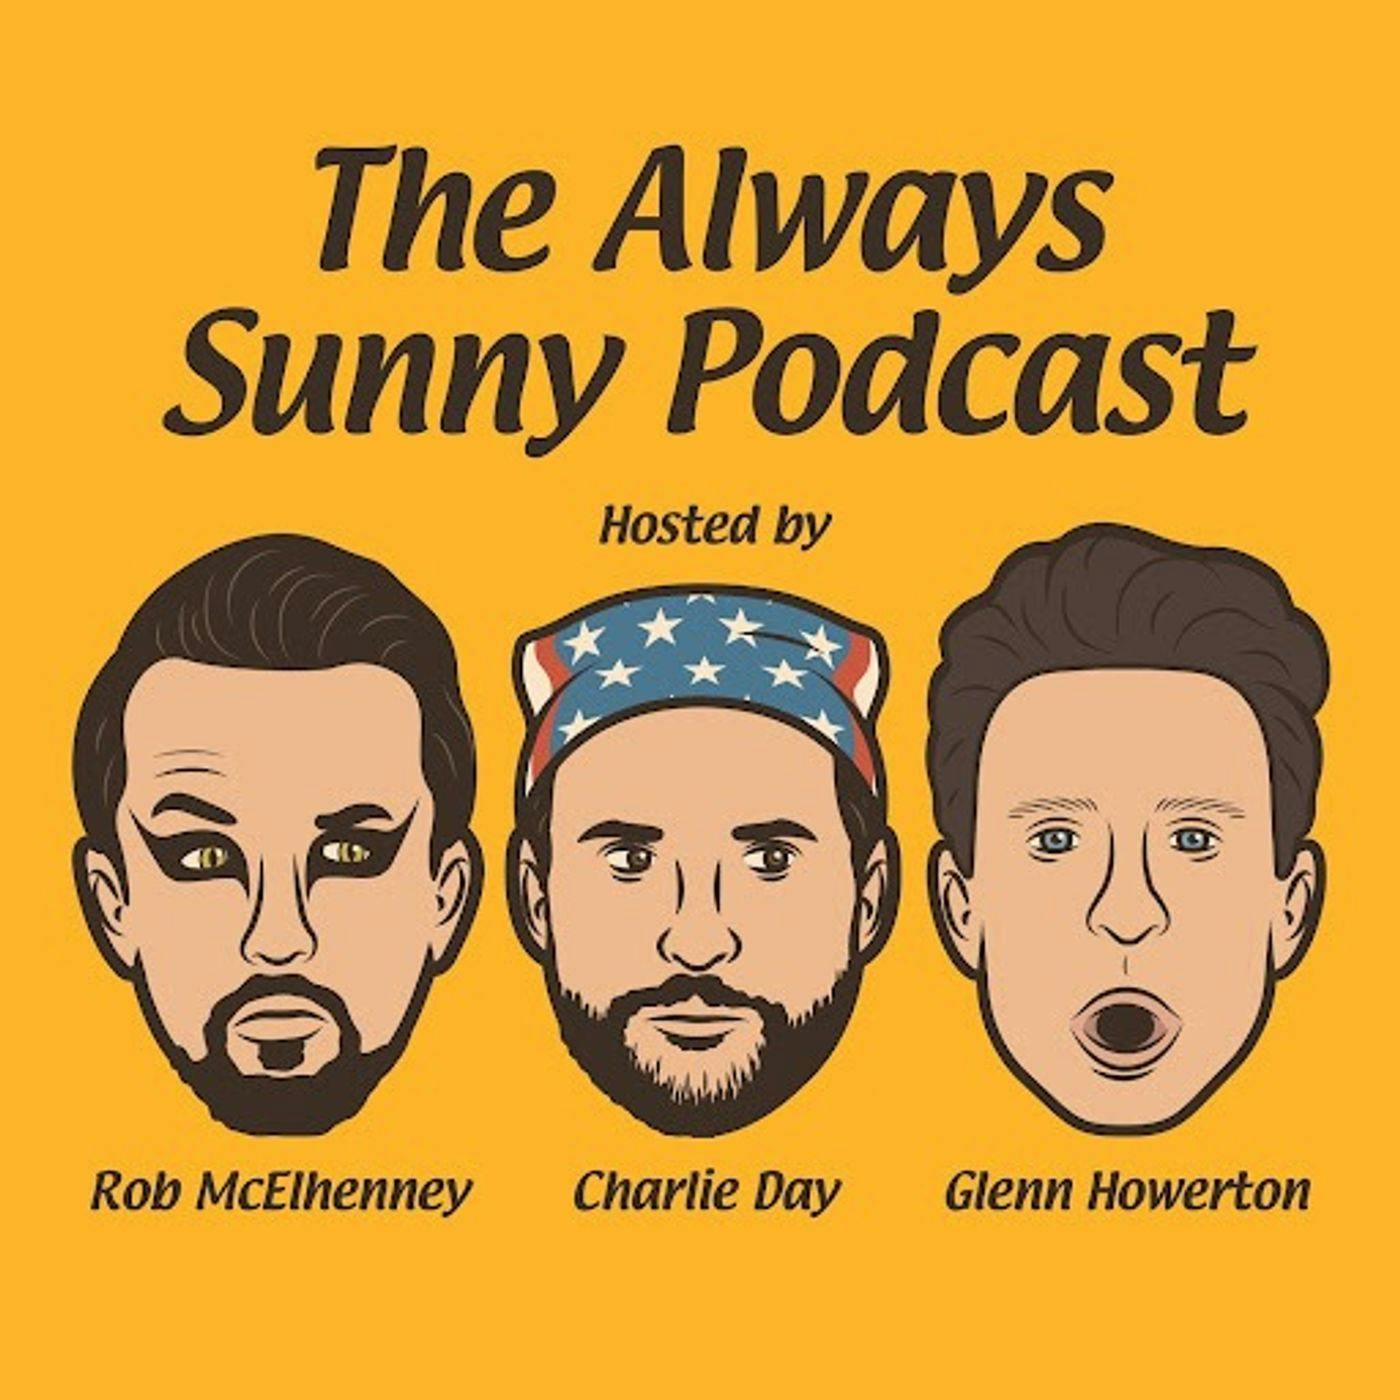 The Always Sunny Podcast podcast show image